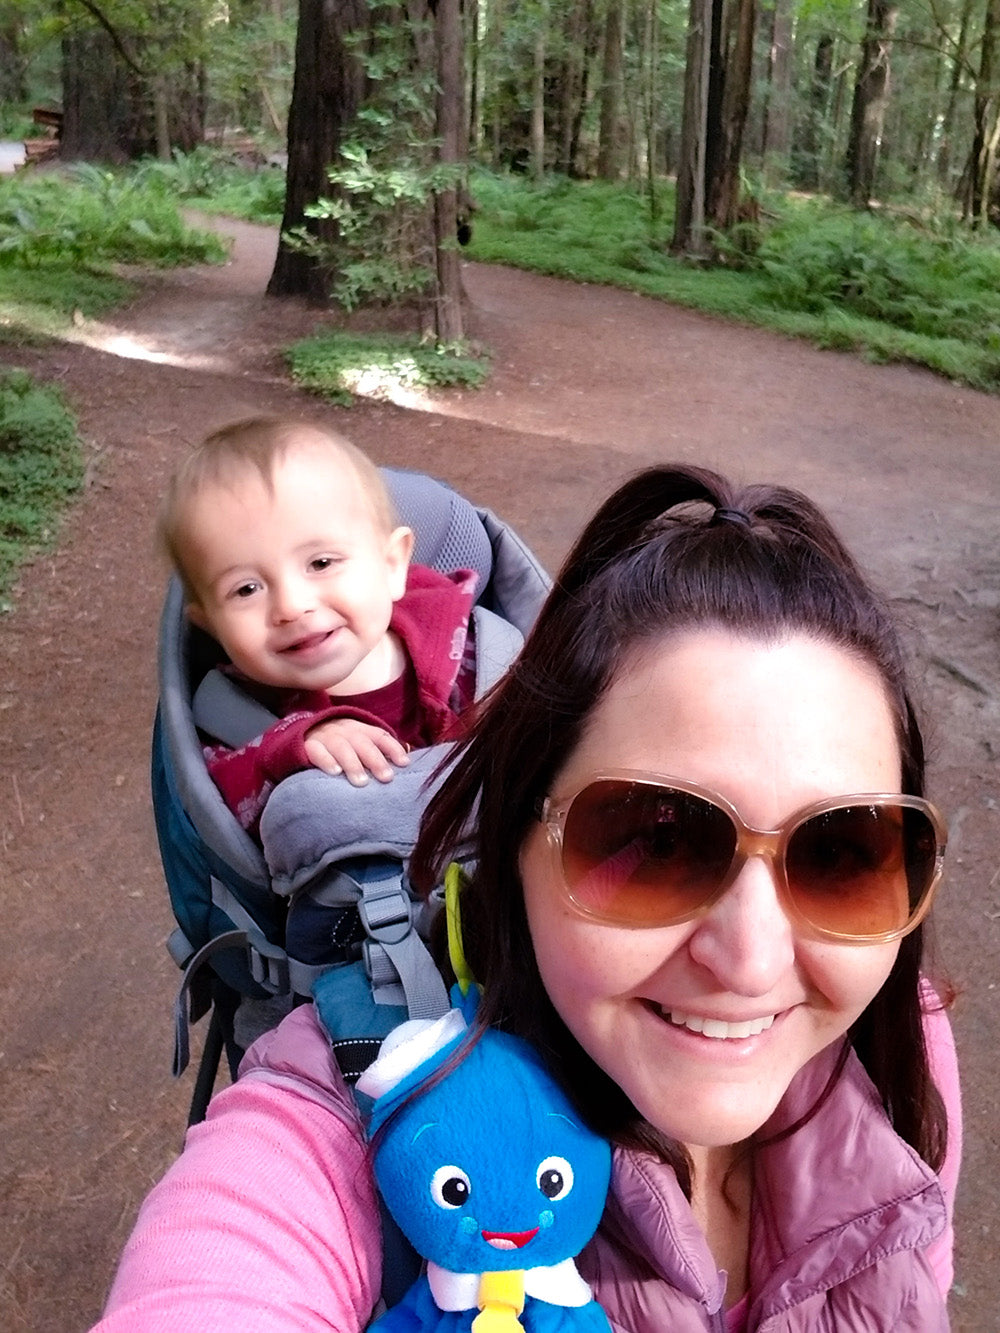 A family that hikes together stays together via Davis Taylor Trading Co ~ My son & I the reason why I work so hard on this biz!